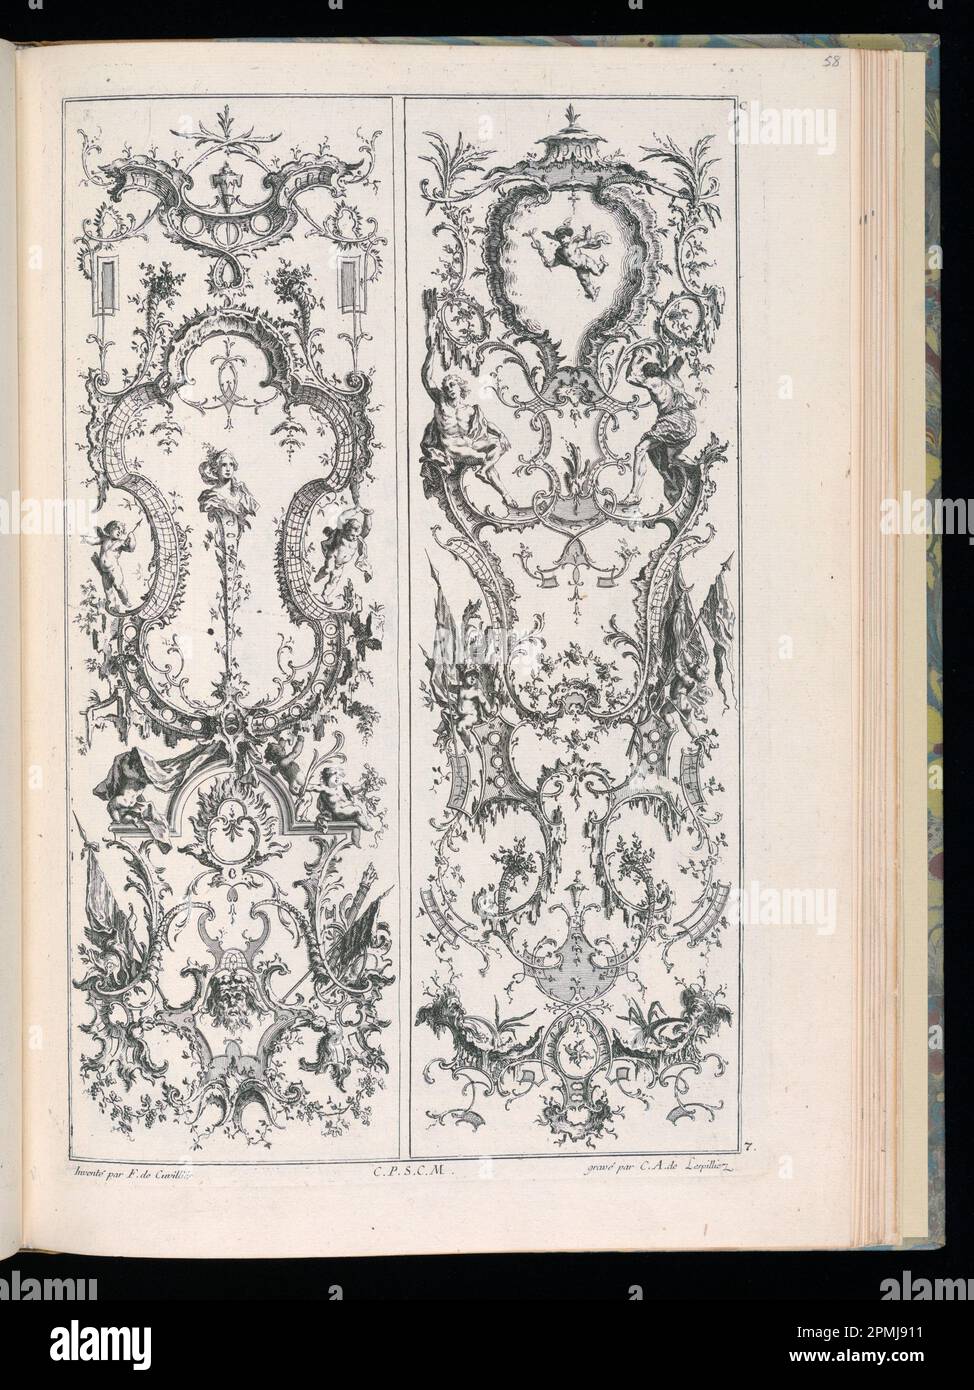 Bound Print, Two Upright Panels, Livre de Paneaux à divers usages (Book of Panels for Various Uses); Designed by François de Cuvilliés the Elder (Belgian, active Germany, 1695 - 1768); Engraved by Karl Albert von Lespilliez (1723–1796); France; engraving on off-white laid paper; Platemark: 36 x 23.5 cm (14 3/16 x 9 1/4 in.) Sheet: 39.2 x 28.3 cm (15 7/16 x 11 1/8 in.) Album: 3 x 30.3 x 40.1 cm (1 3/16 x 11 15/16 x 15 13/16 in.) Album open: 13.5 x 58.6 x 40 cm (5 5/16 x 23 1/16 x 15 3/4 in.) Stock Photo